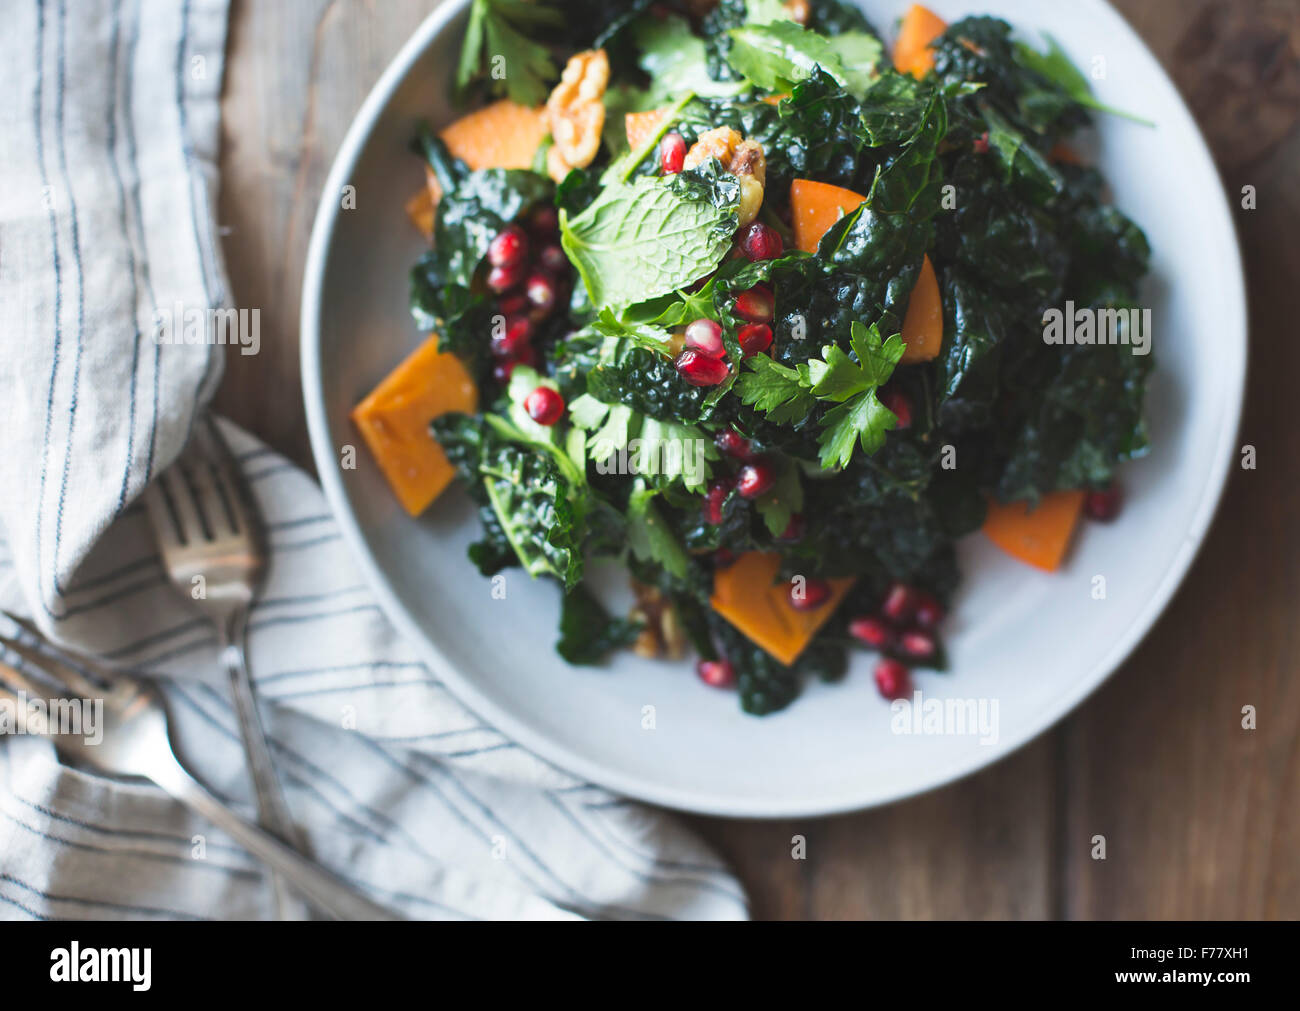 kale salad with herbs, pomegranate, persimmon Stock Photo